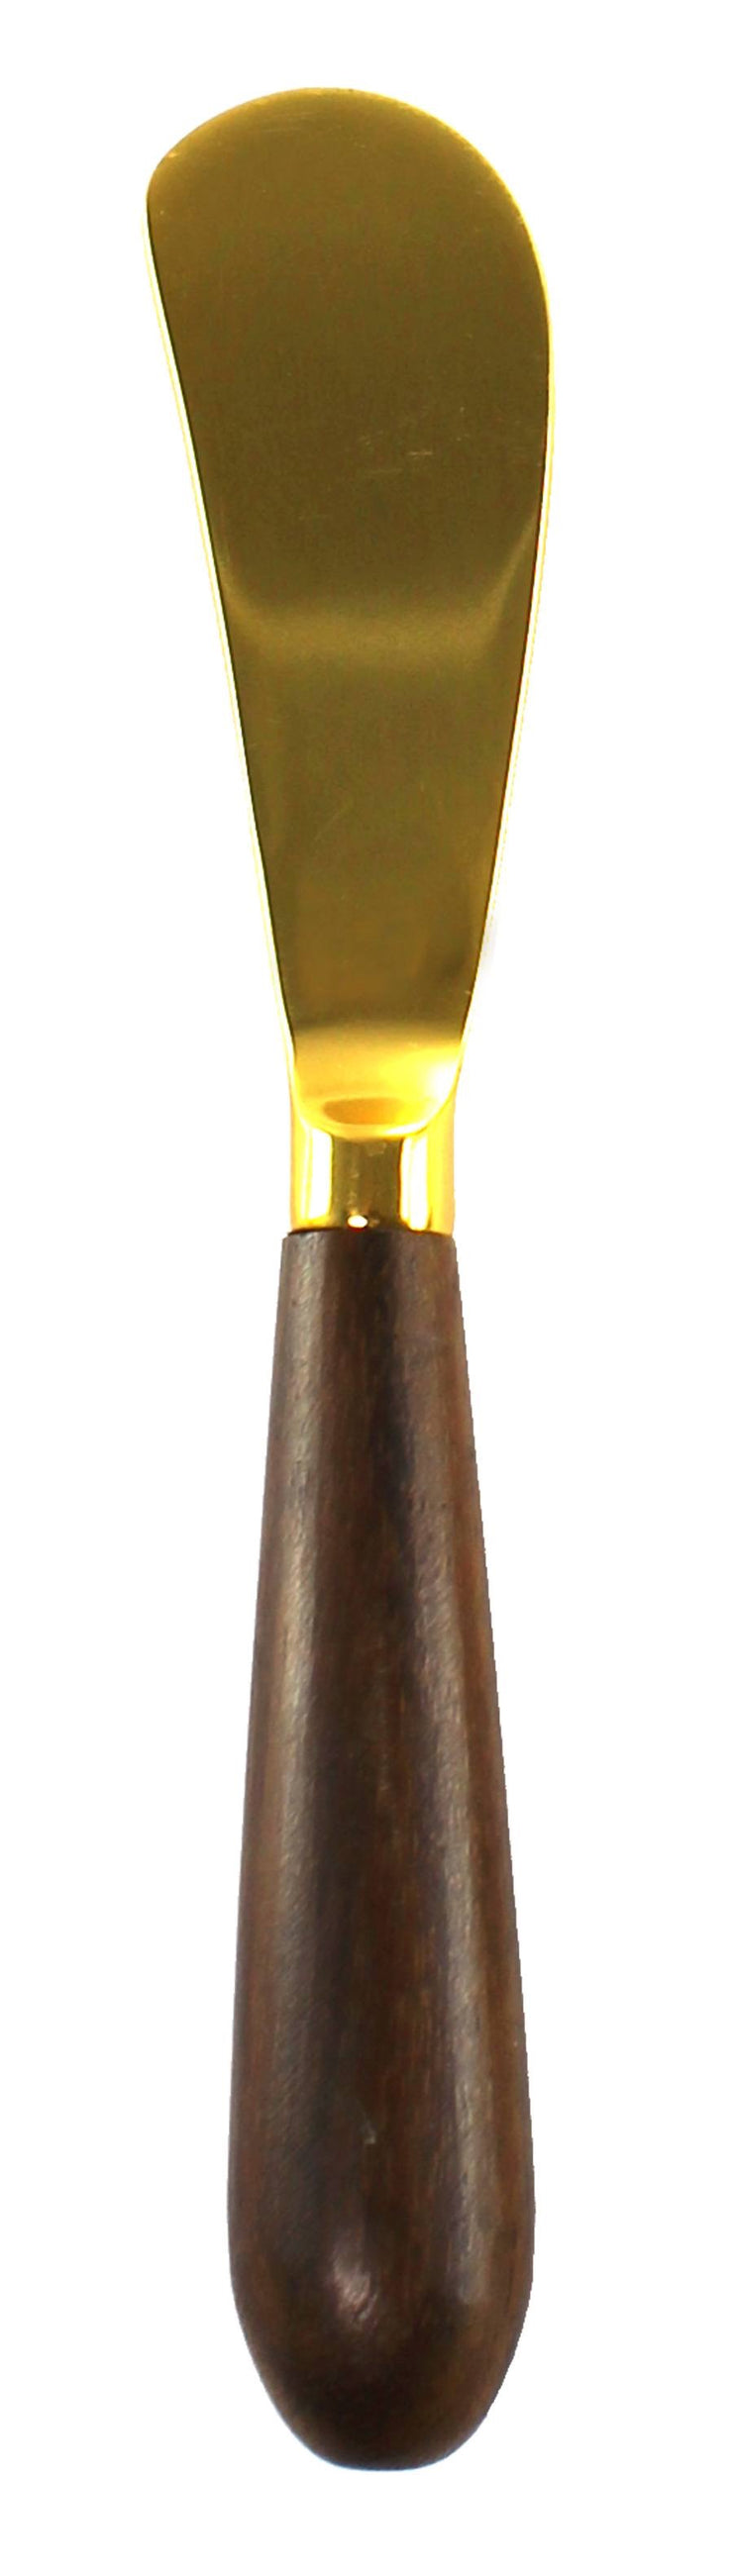 Gold and Wood Large Spreader